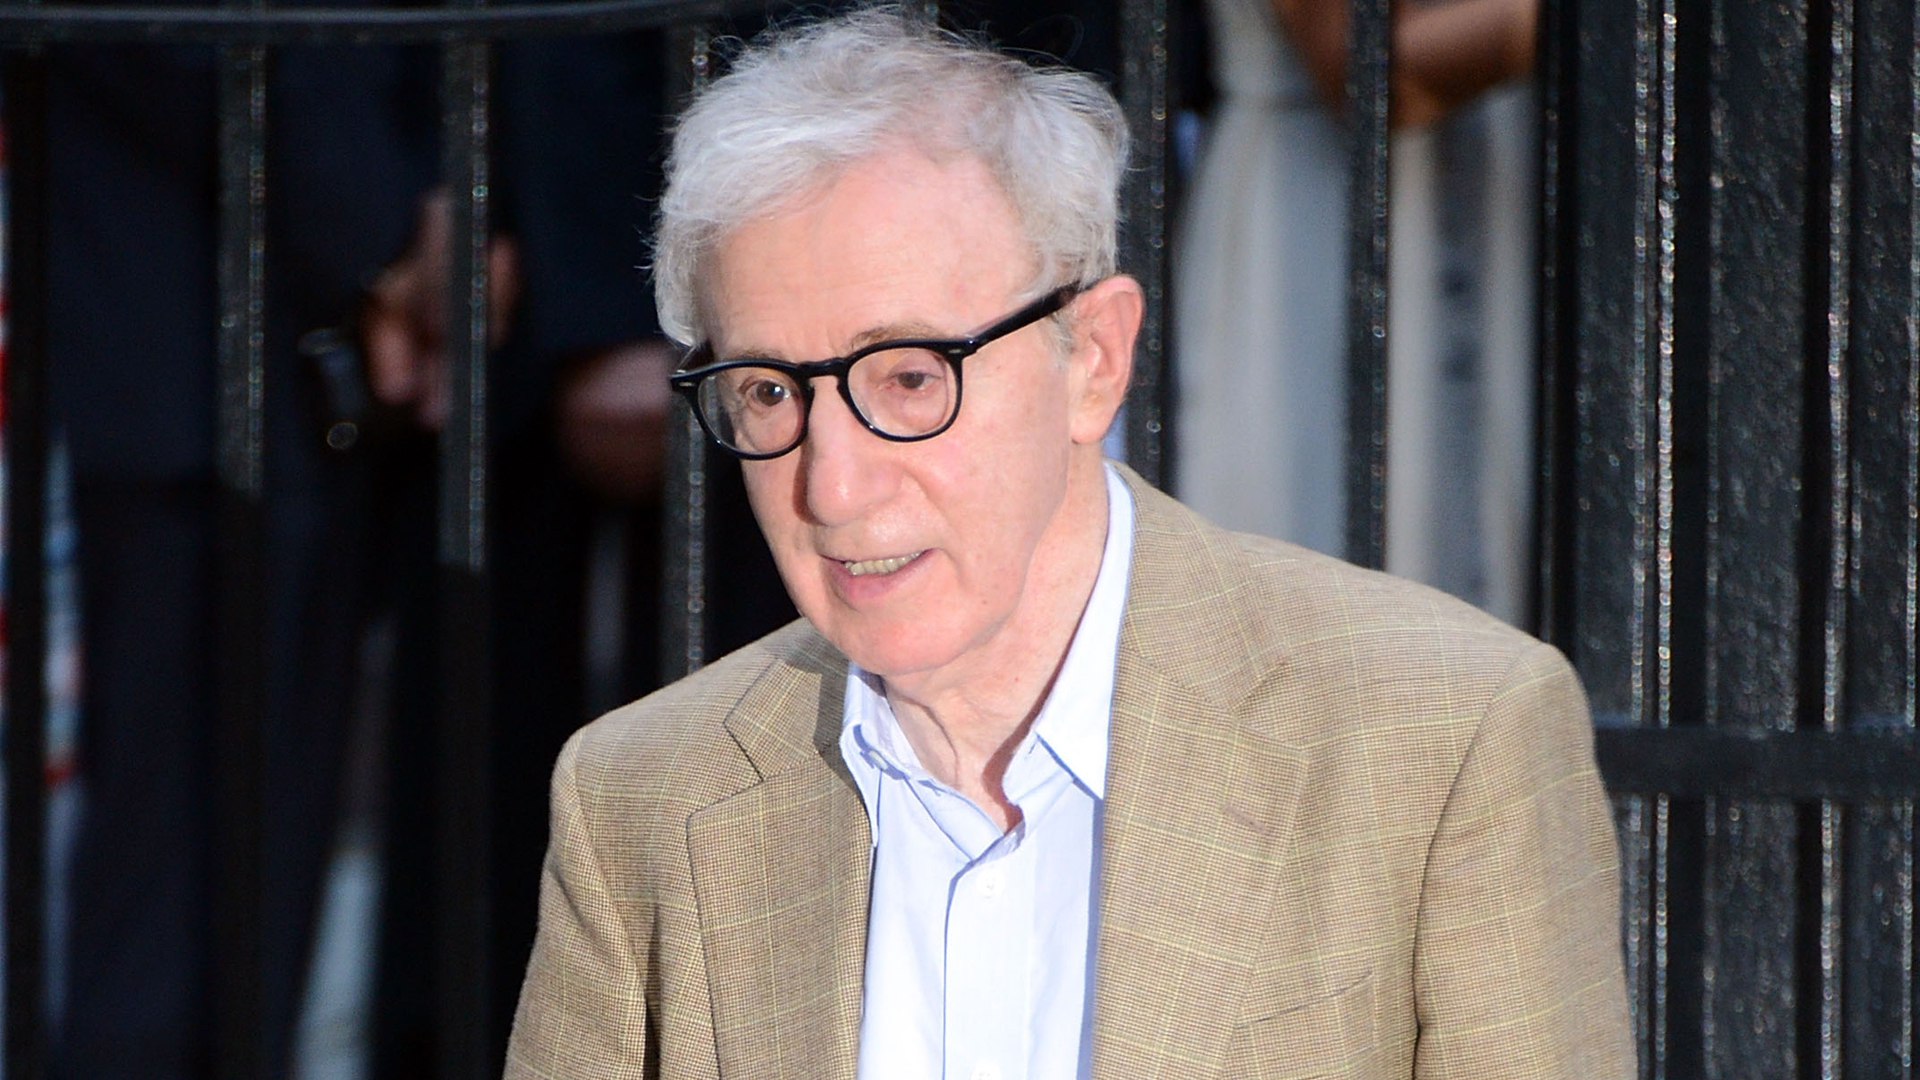 Adopted Daughter Accuses Woody Allen of Assaulting Her at Age 7